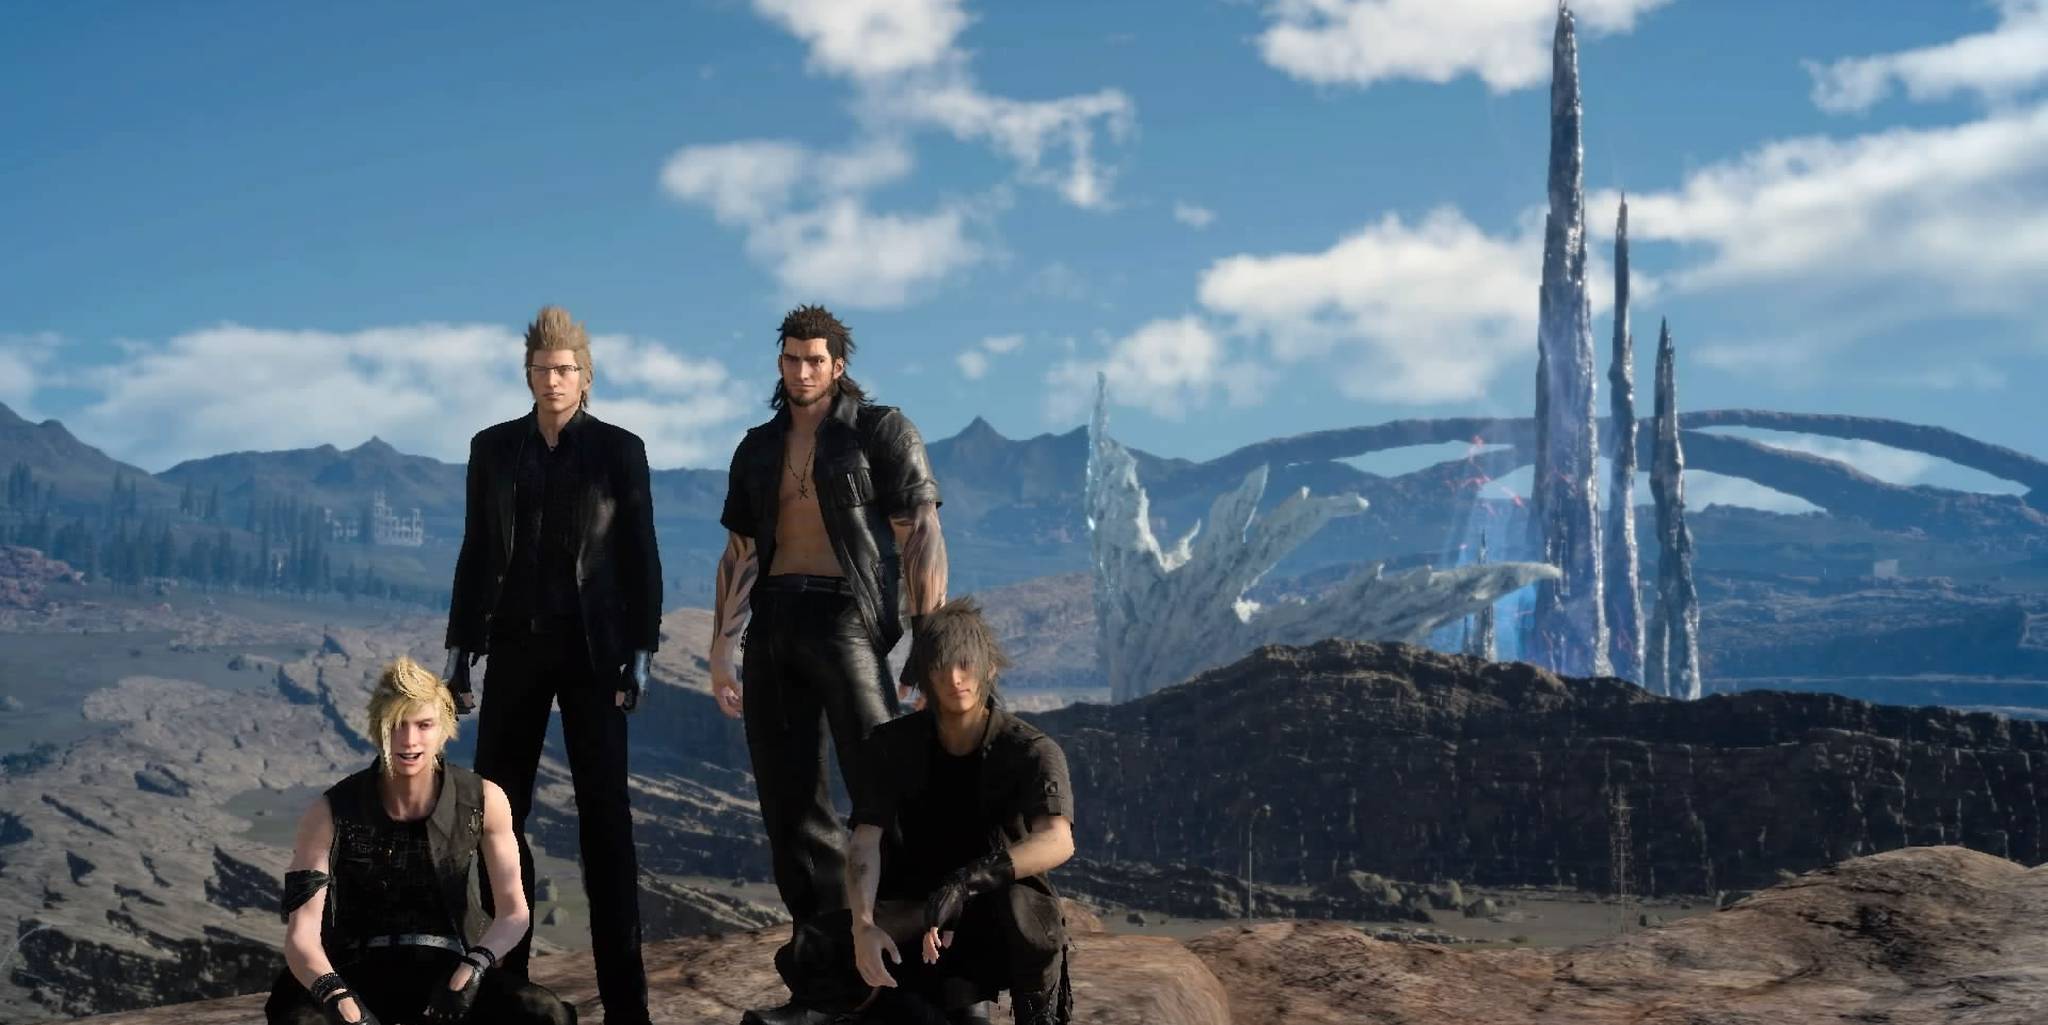 Brotherhood: Final Fantasy 15 Episode 1 - Before the Storm Review - IGN